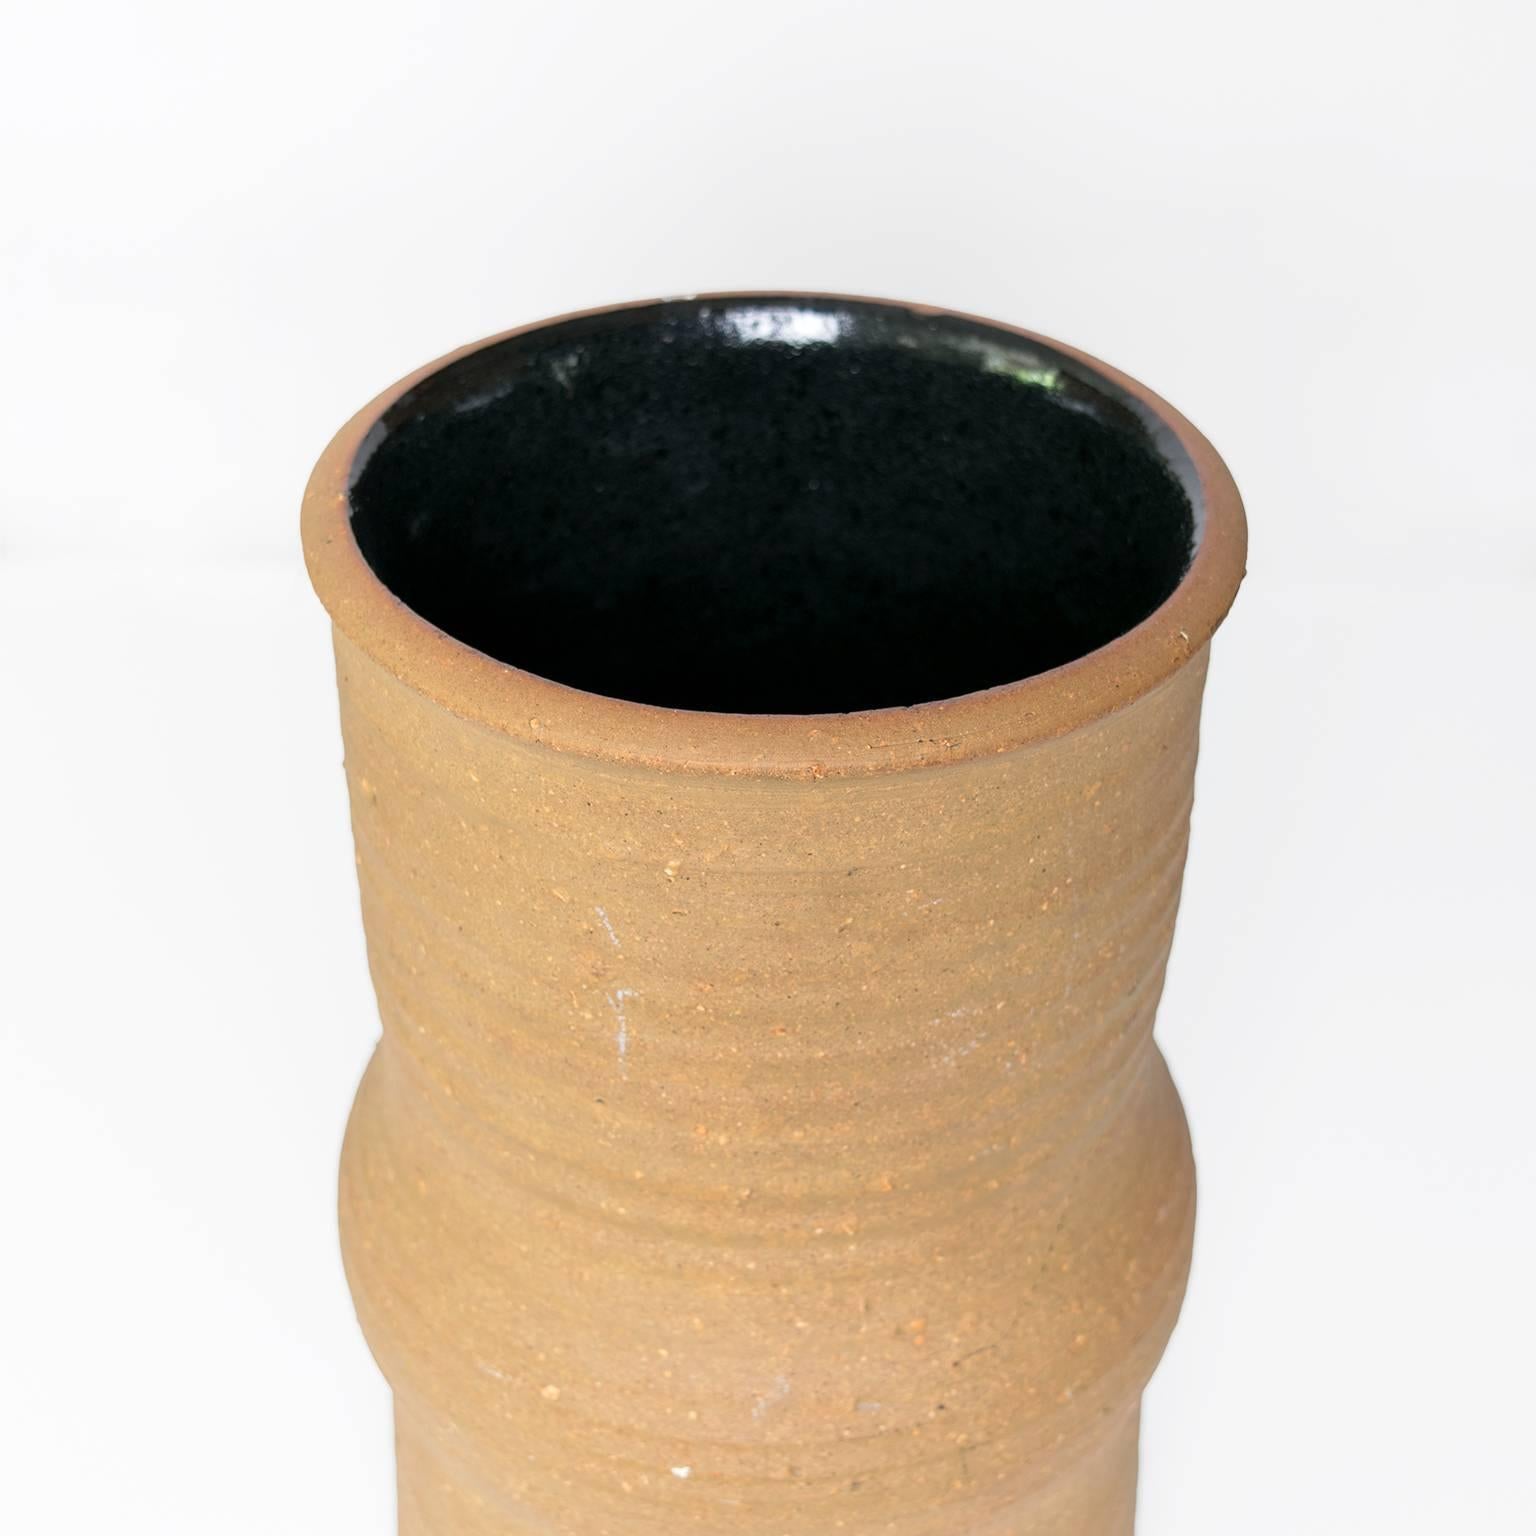 Glazed Tall Scandinavian Modern Ceramic Vase by Signe Persson-Melin For Sale